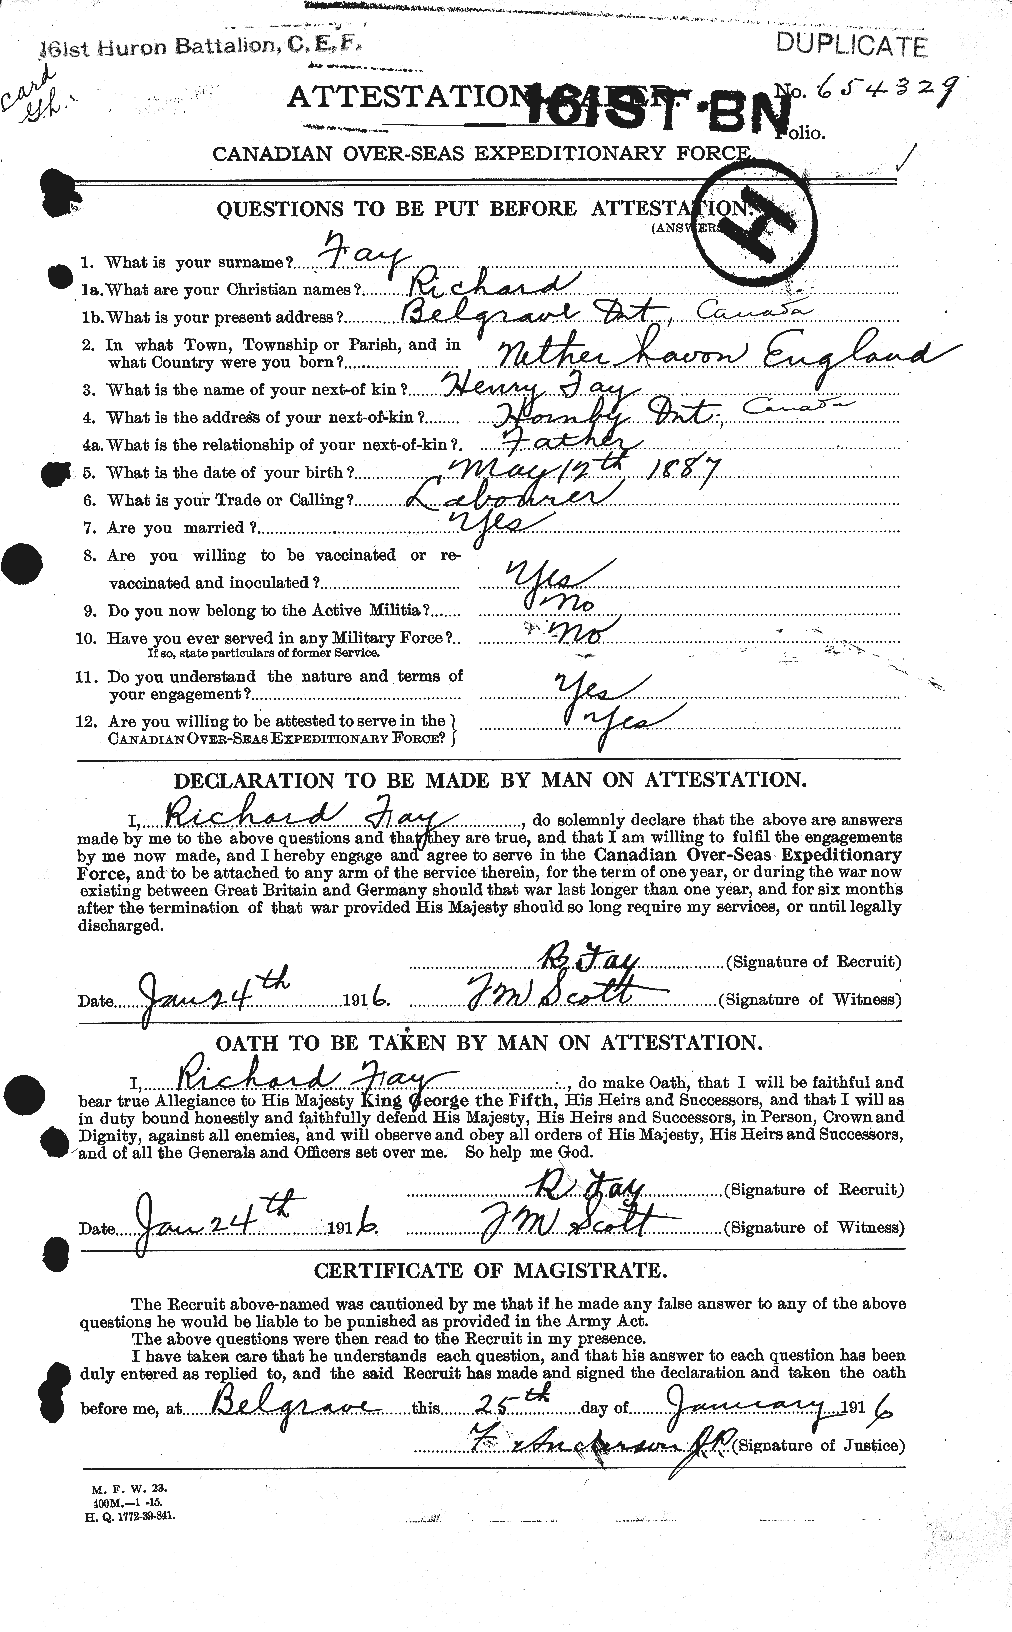 Personnel Records of the First World War - CEF 319486a